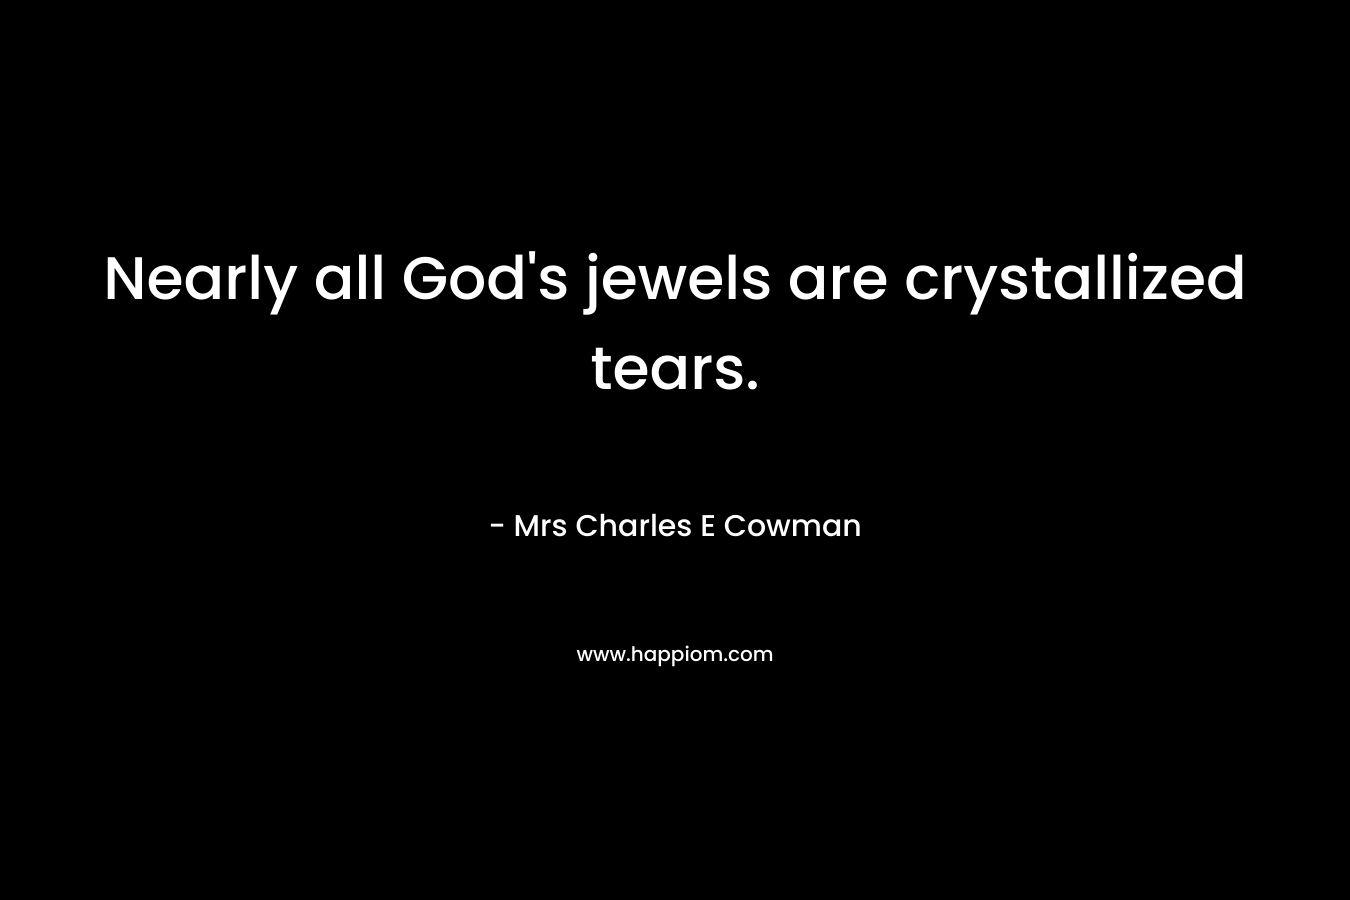 Nearly all God’s jewels are crystallized tears. – Mrs Charles E Cowman